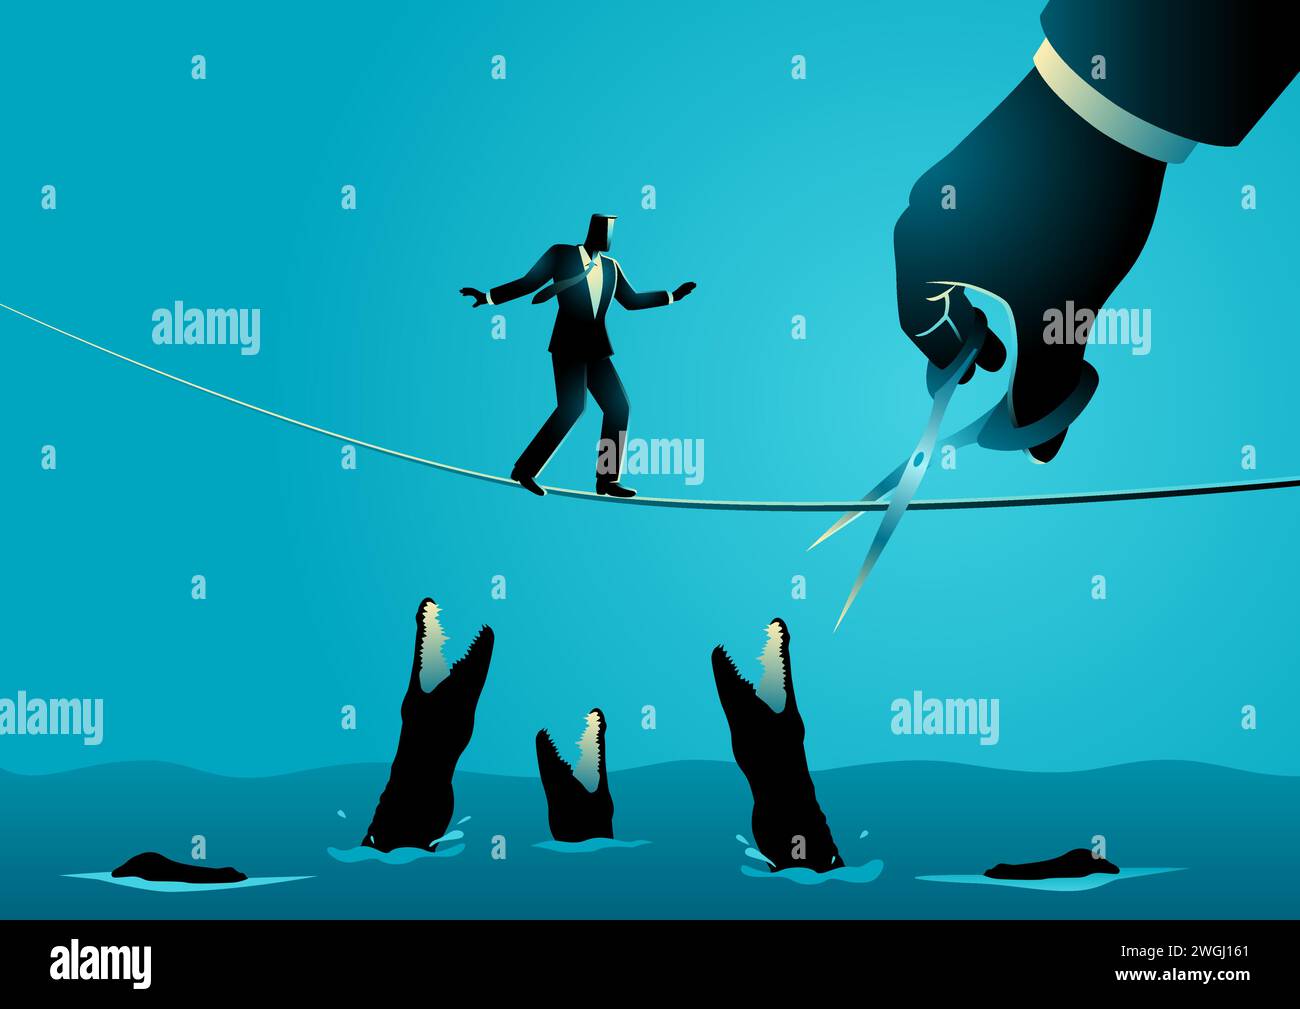 Business concept illustration of a businessman running on rope over a river full with alligators, meanwhile a giant hand with scissors is cutting the Stock Vector